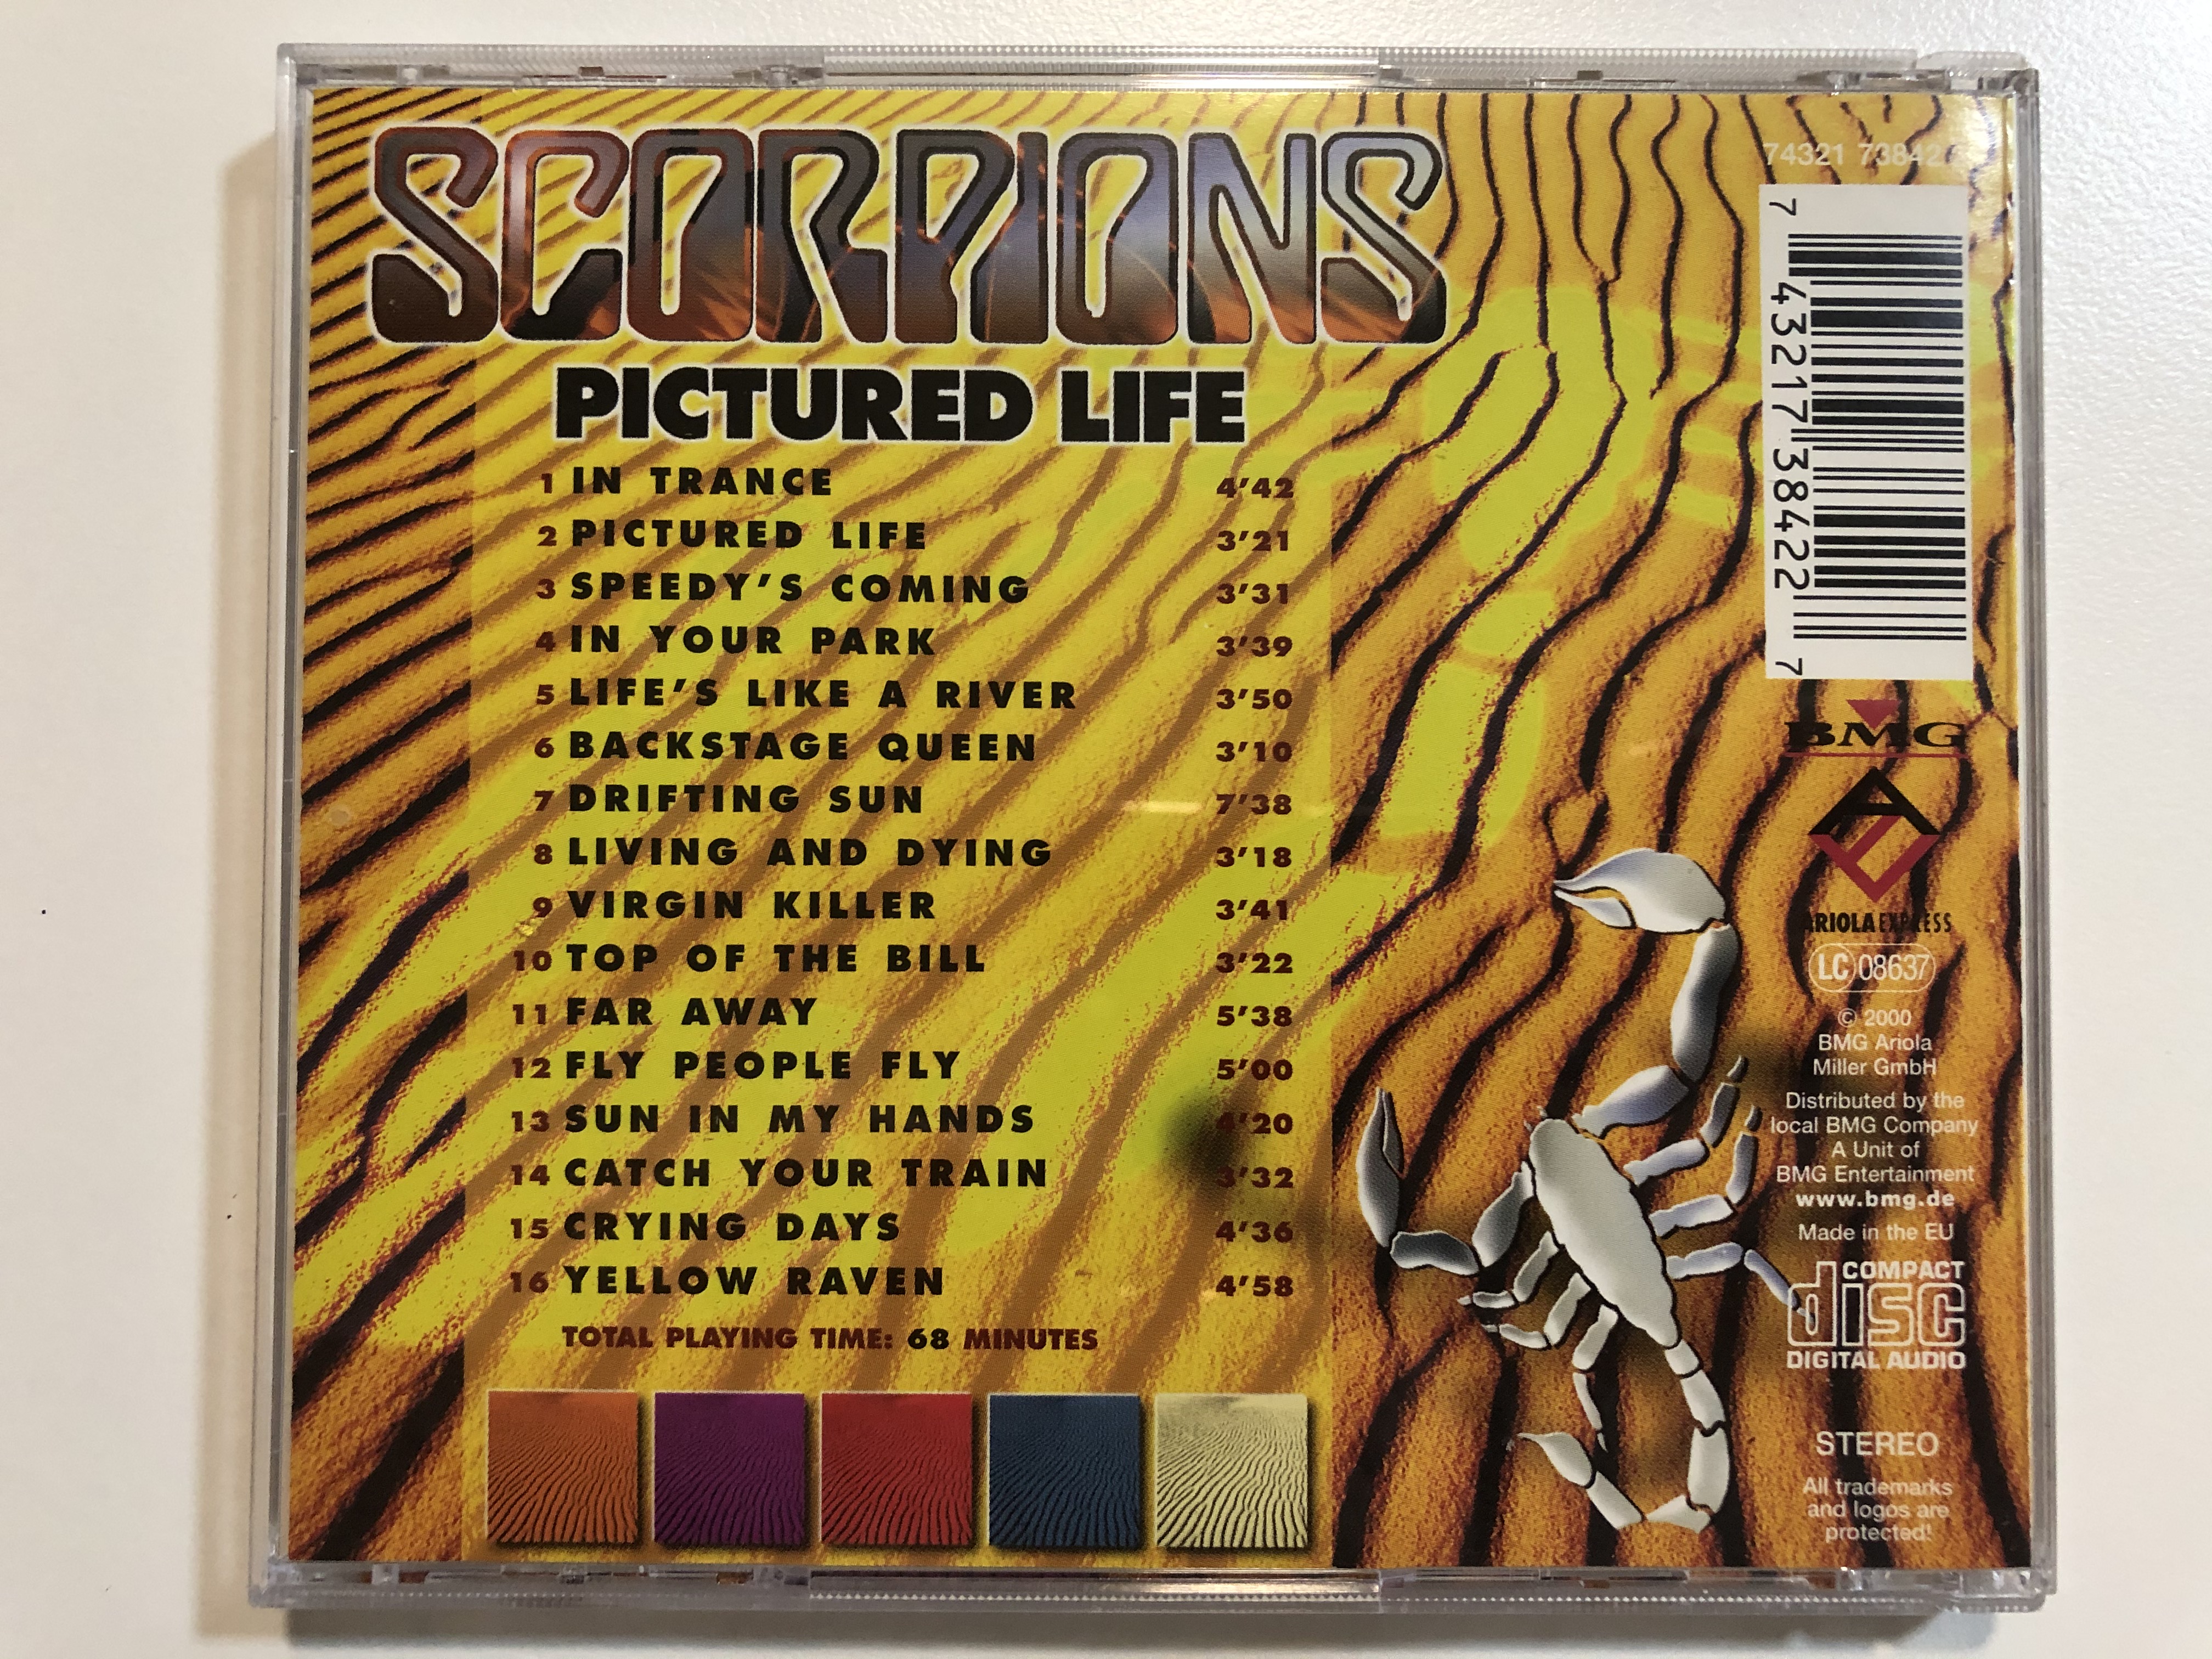 scorpions-pictured-life-all-the-best-life-s-like-a-river-in-your-park-pictured-life-in-trance-virgin-killer-drifting-sun-yellow-raven-and-many-more-bmg-audio-cd-2000-stereo-743.jpg